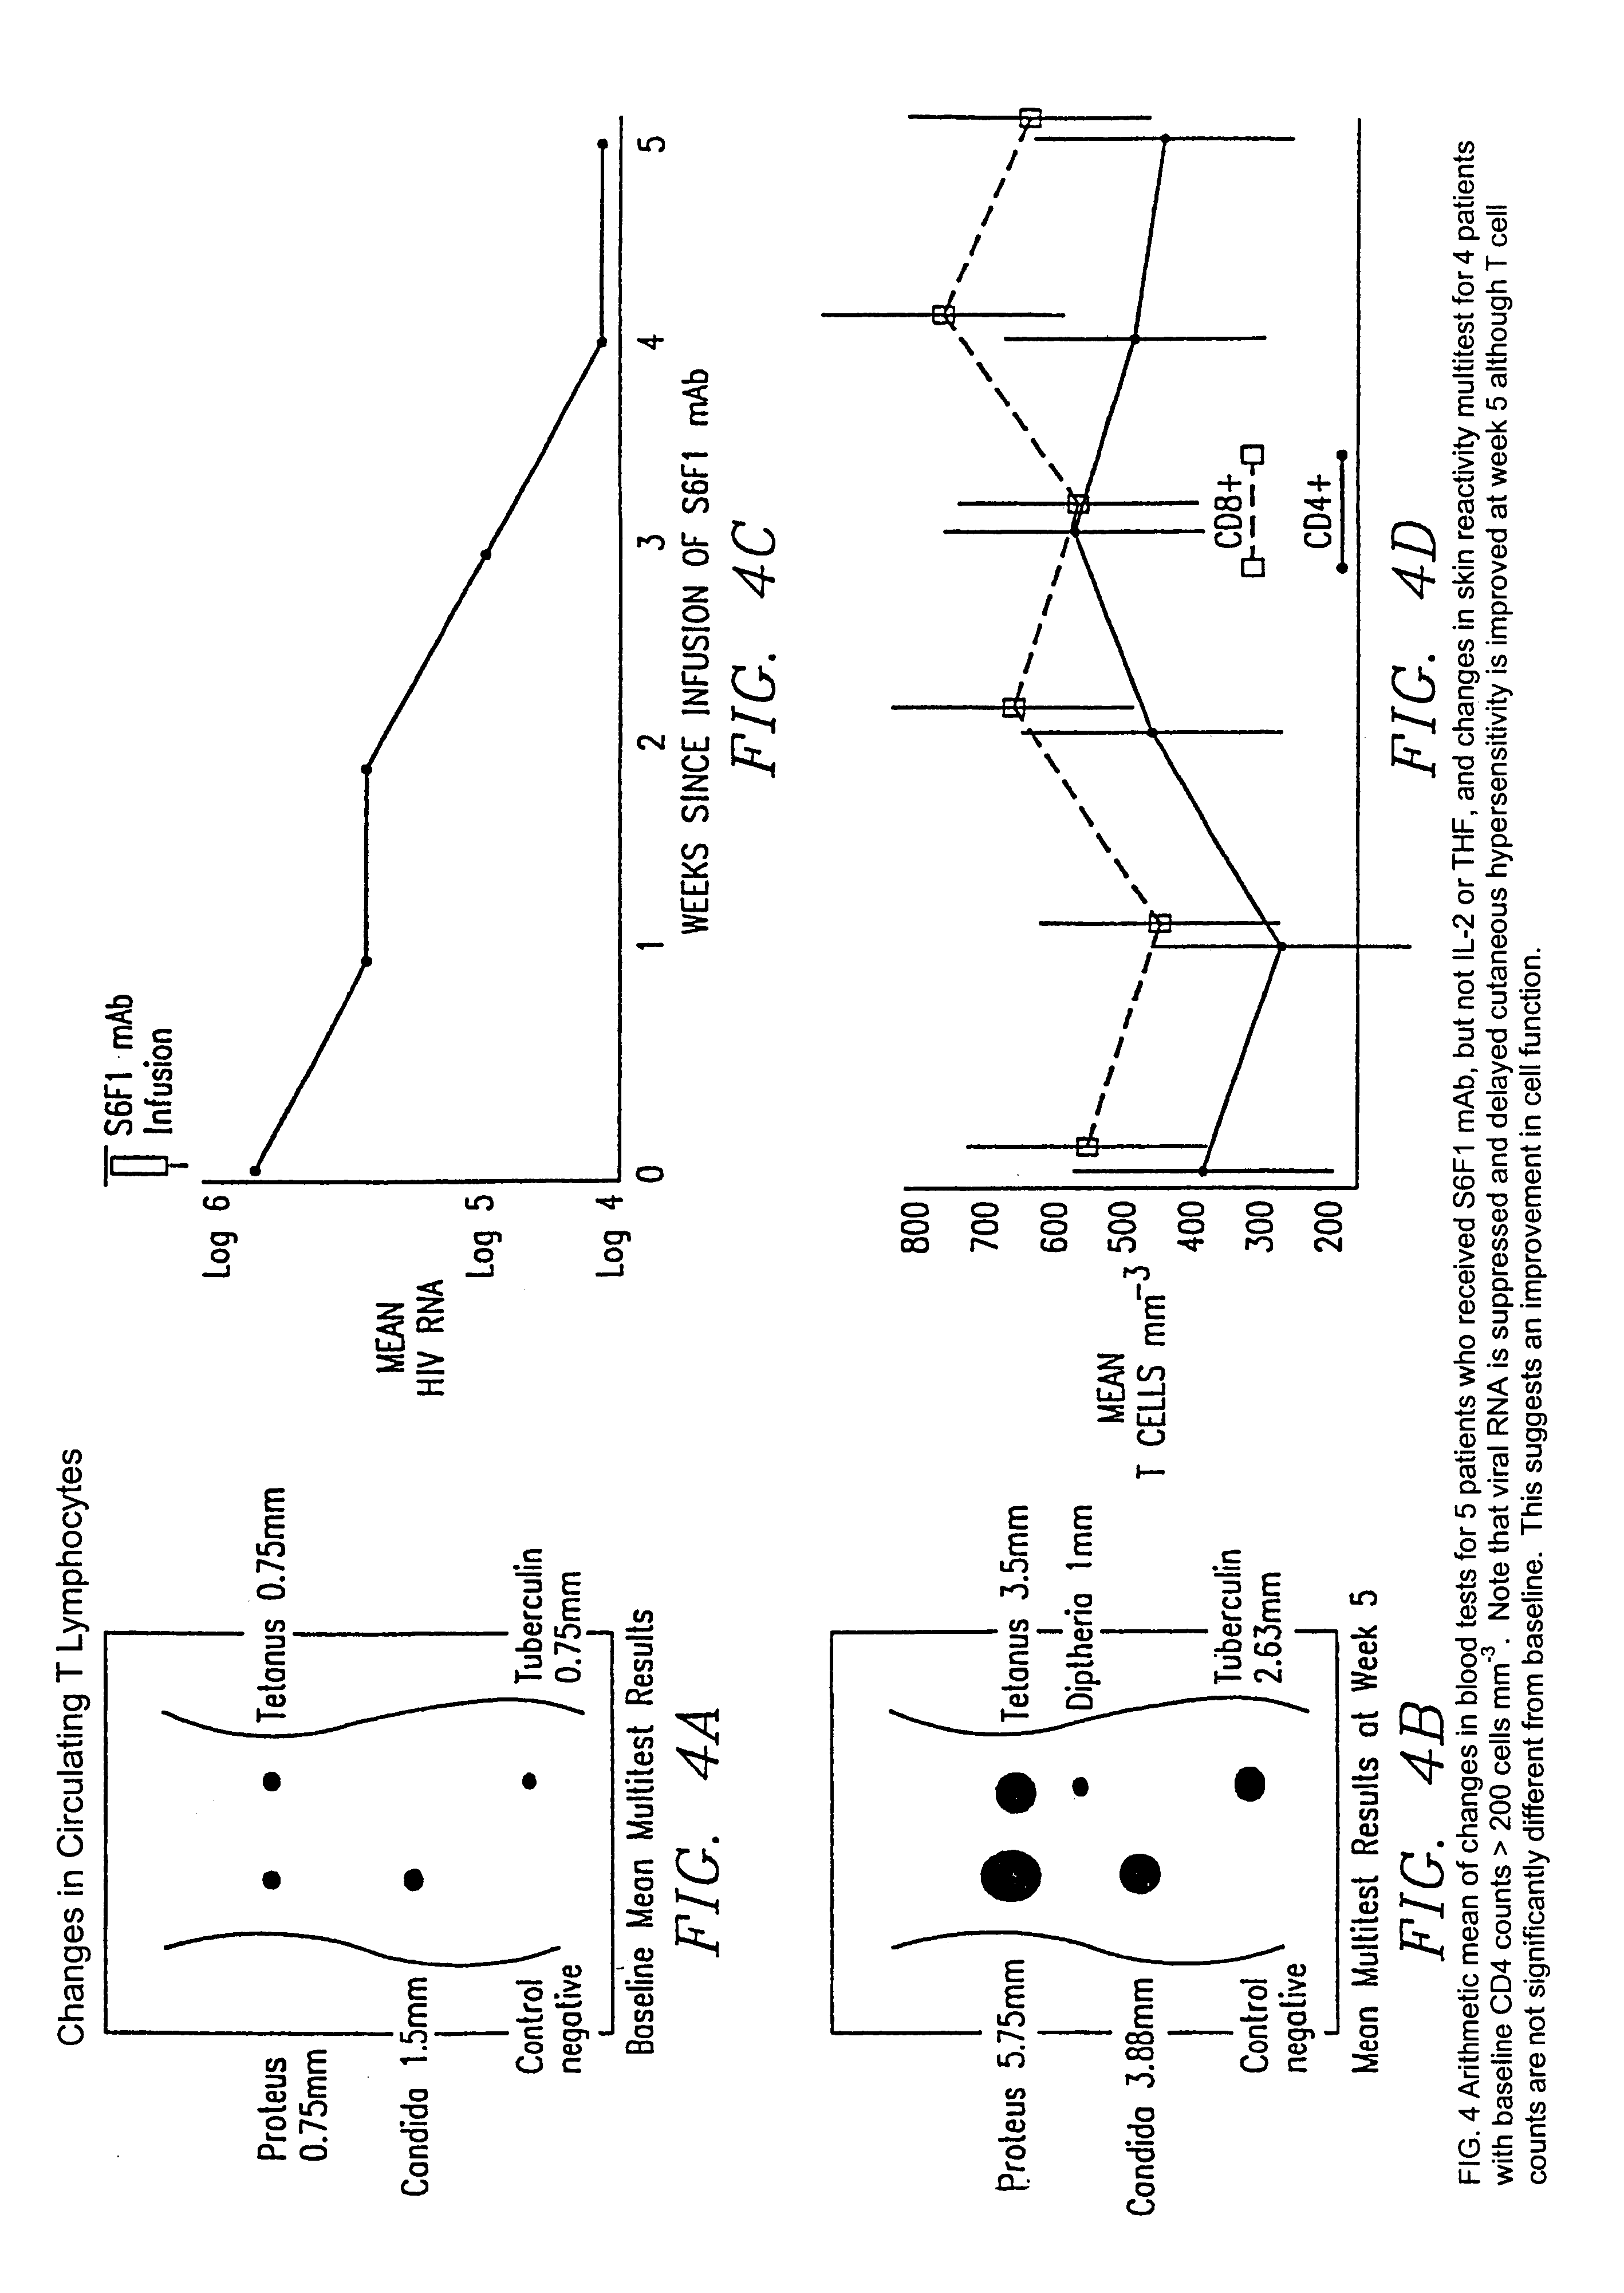 Method increasing the delayed-type hypersensitivity response by infusing LFA-1-specific antibodies